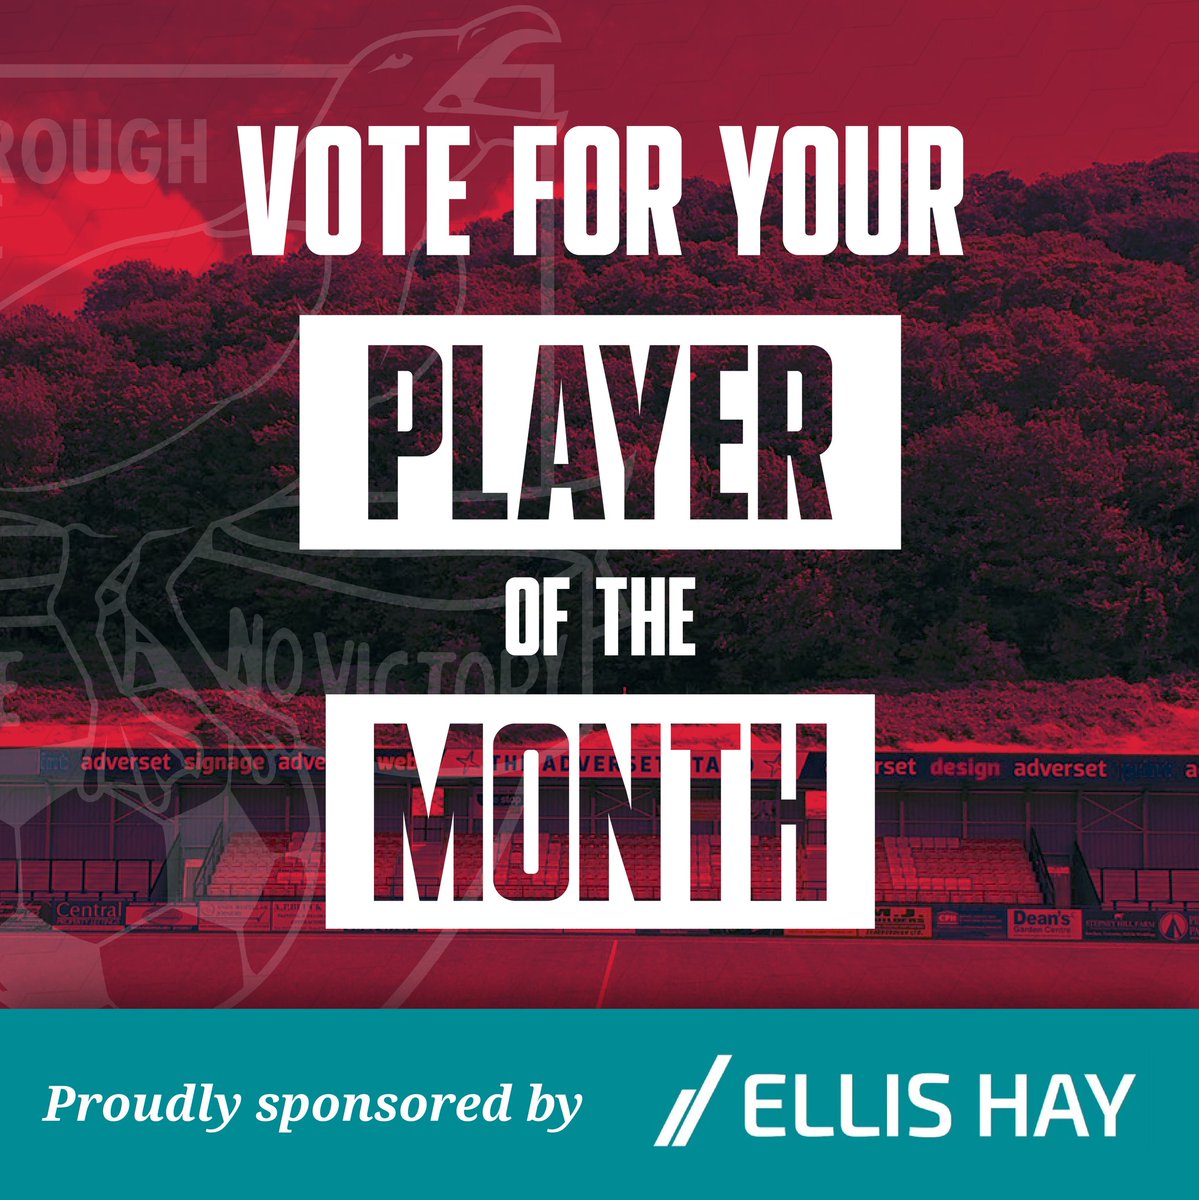 𝑰𝒕'𝒔 𝒕𝒊𝒎𝒆 𝒕𝒐 𝒑𝒍𝒂𝒄𝒆 𝒚𝒐𝒖𝒓 𝒗𝒐𝒕𝒆 📊

Voting is now open for your March Player of the Month  👇

Vote using the form: forms.gle/QGu2yeUn6bgRPg…

Player of the Month sponsored by: @EllisHayScarb